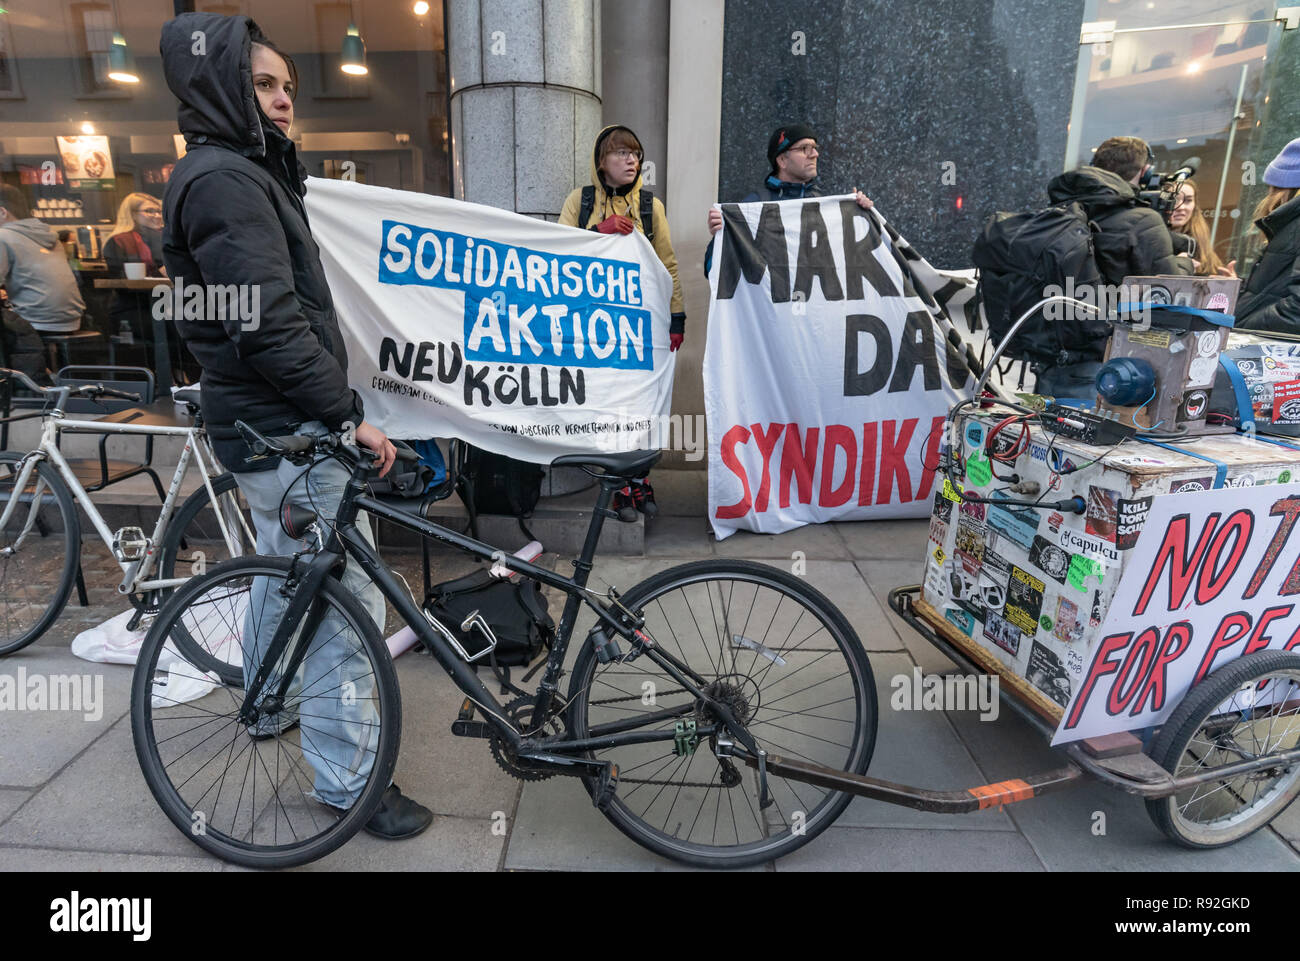 London, UK. 18th December 2018. Berlin community centre and pub Syndikat protested with London Renters Union outside the London offices of their landlord, Global Real Estate Investors Limited, owned by the secretive Pears brothers, three of the richest men in the UK, who through various 'letterbox' companies own around 6200 properties in Berlin, against notice to quit after being open for 33 years in Berlin-Neukölln. Credit: Peter Marshall/Alamy Live News Stock Photo